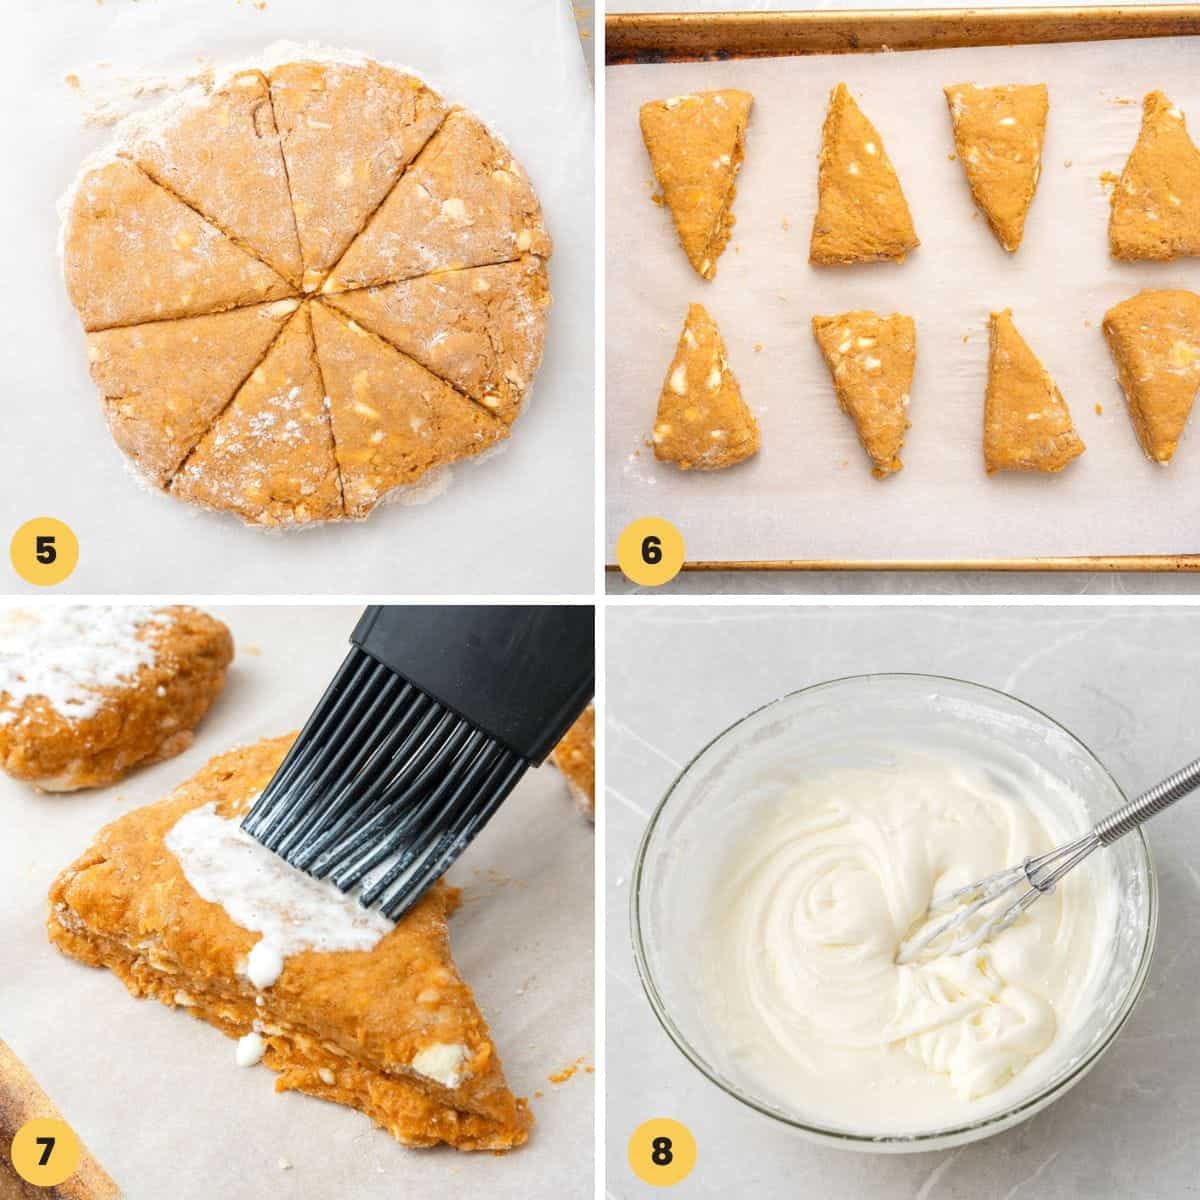 a collage of four images showing how to make, cut, and bake pumpkin scones.